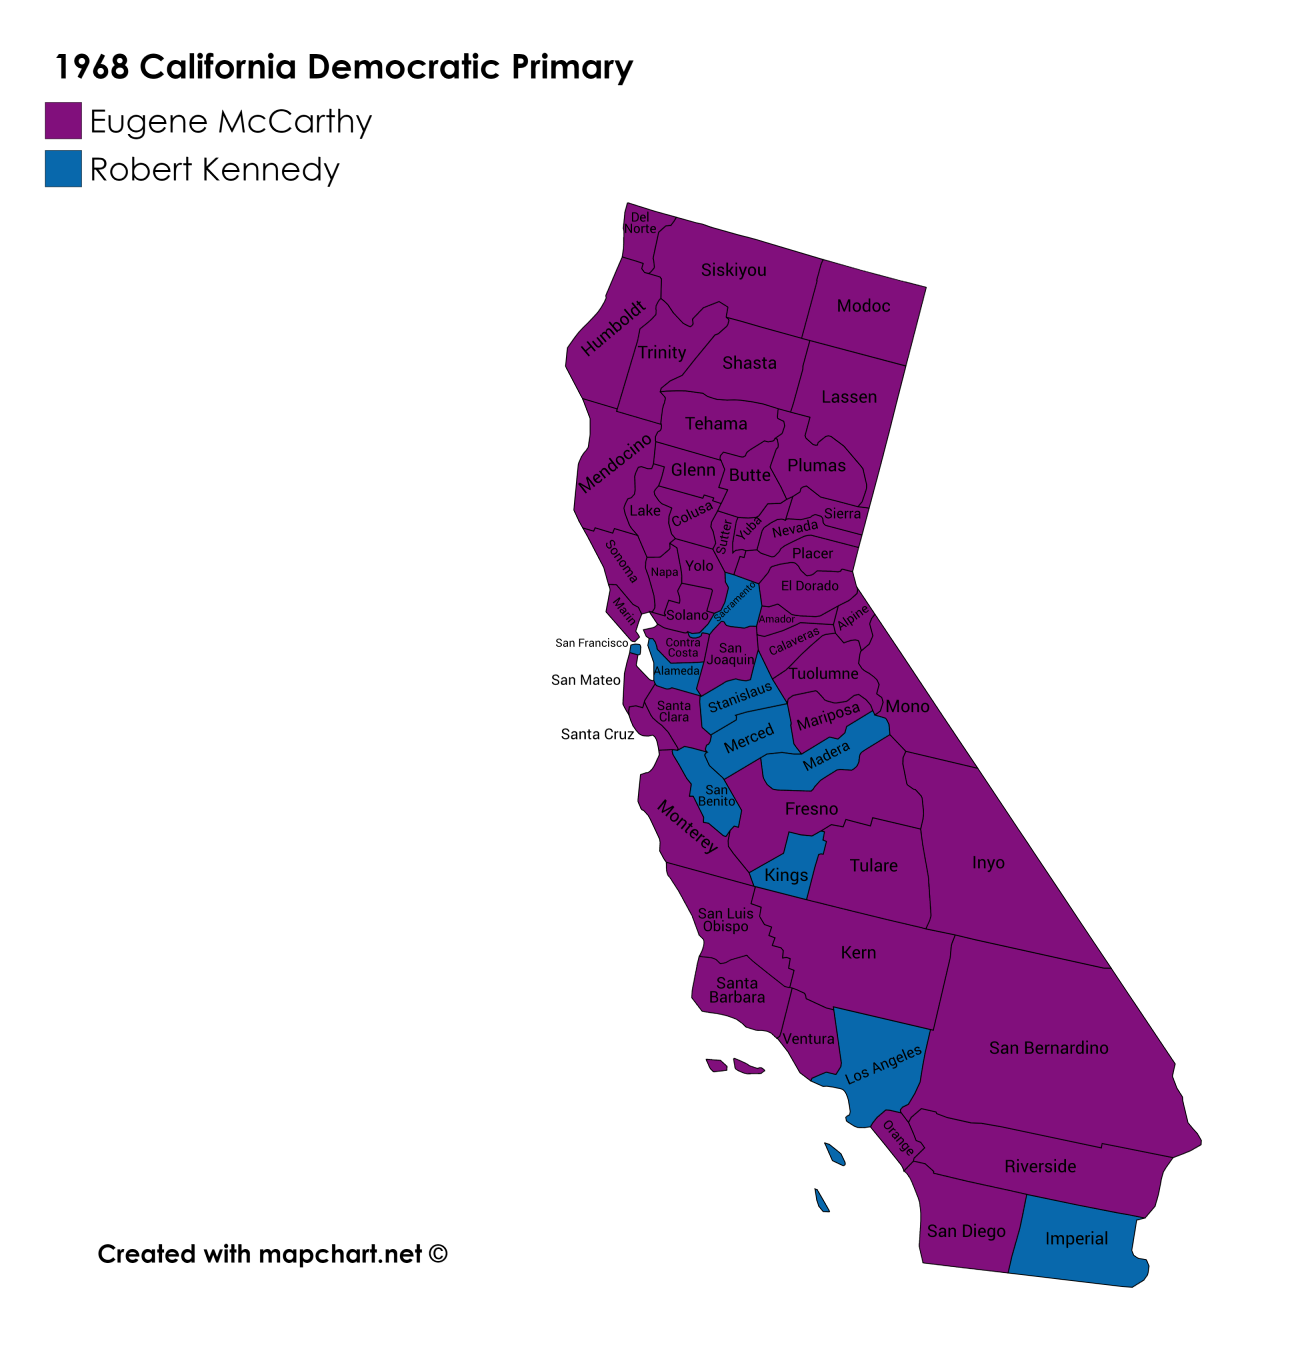 1968 California Democratic Primary cropped.png